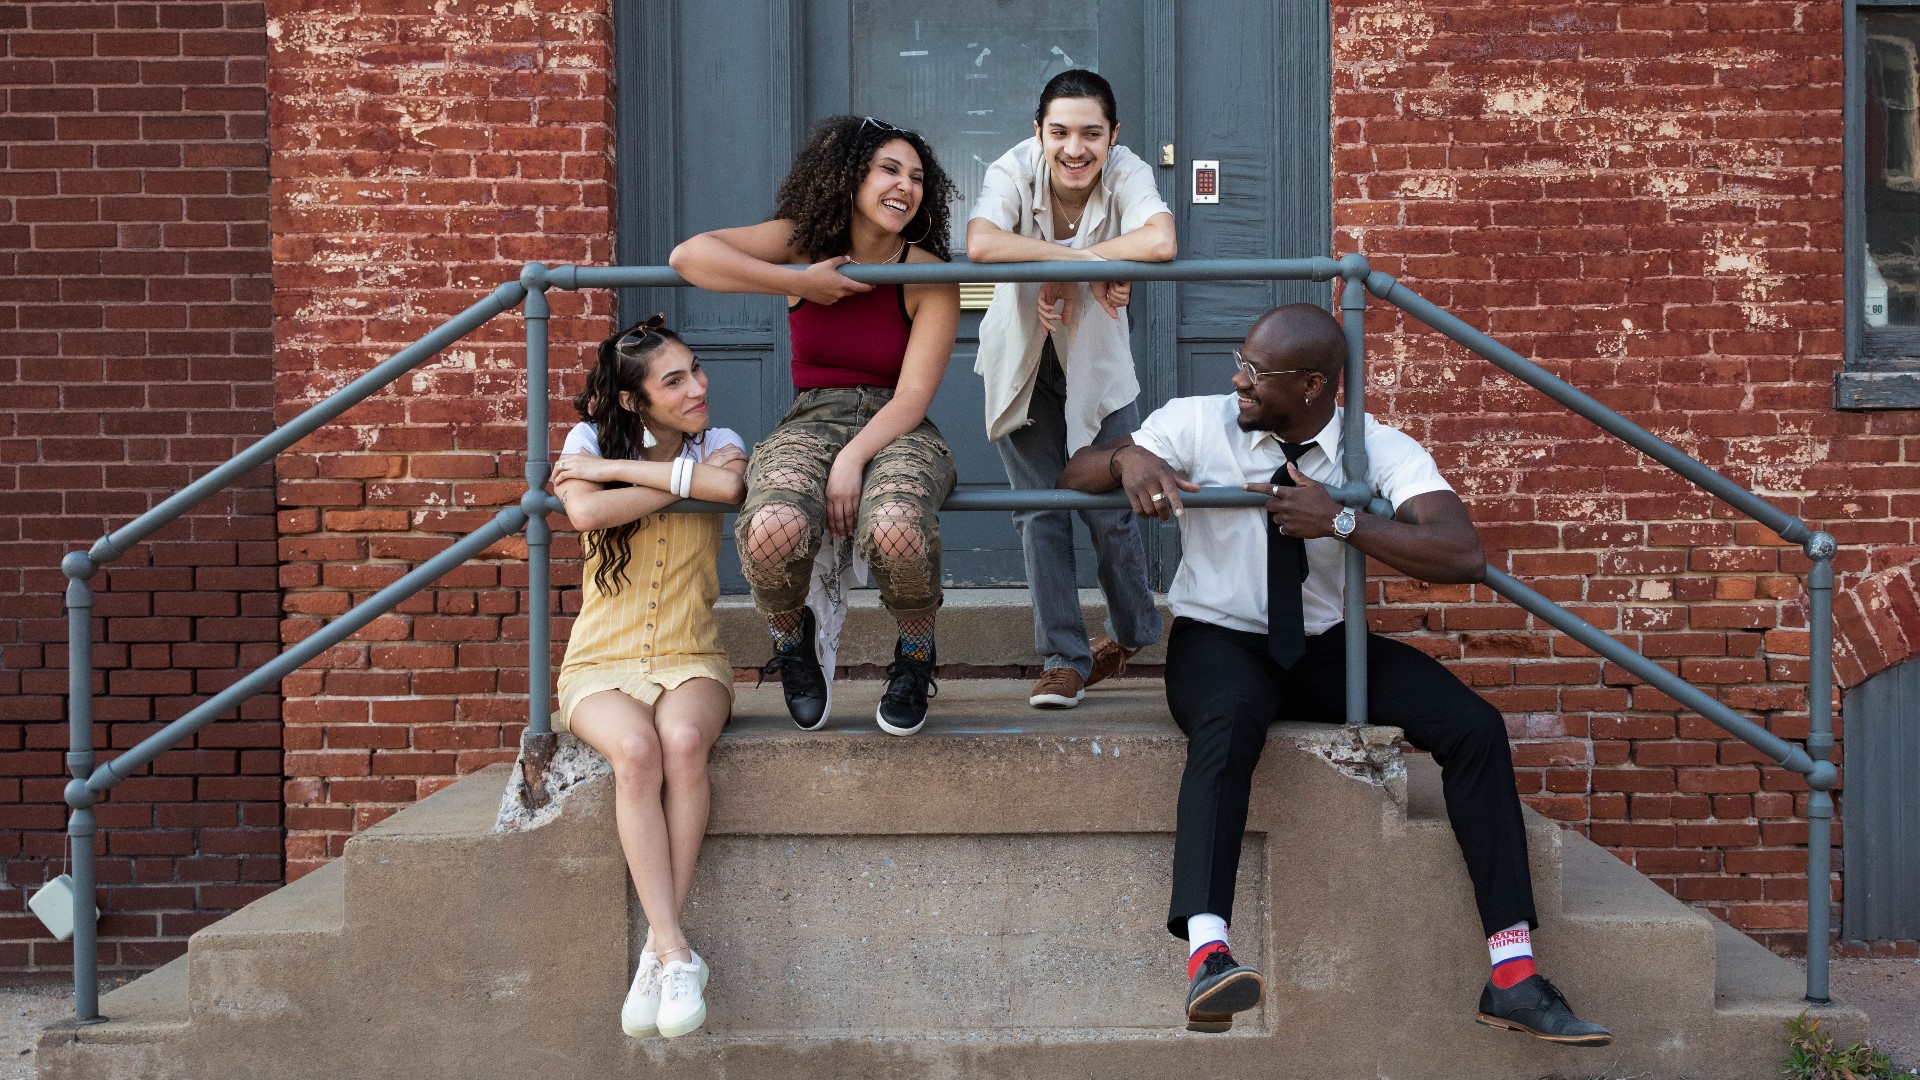 "In the Heights" opens tonight at Dreamwrights Center for Community Arts in York. Usanavi and his friends dream and work for a better future in New York City.